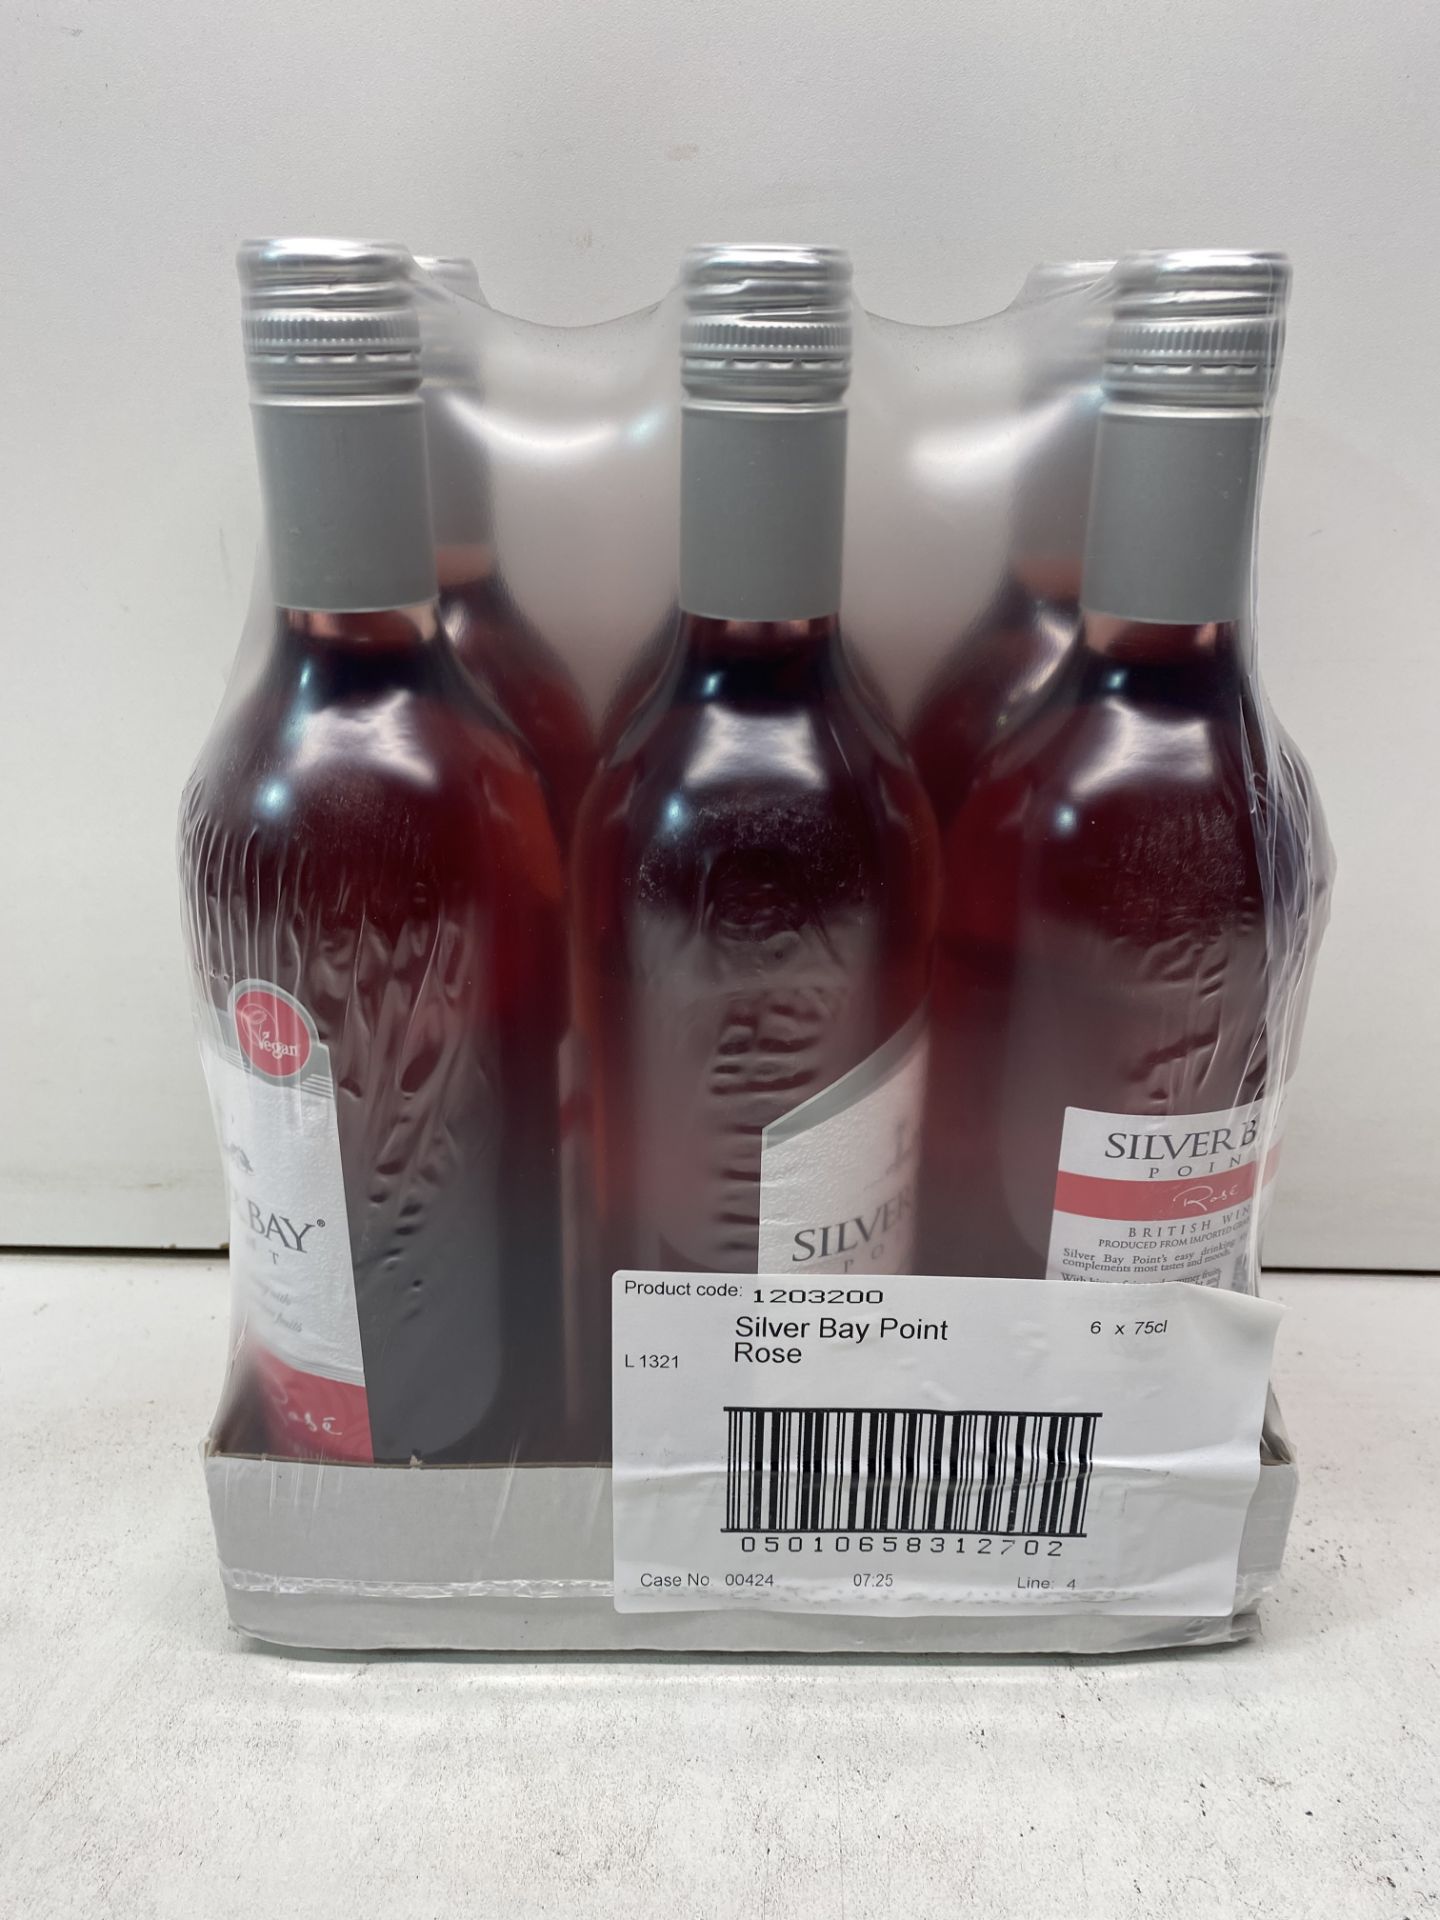 30 x Bottles Of Silver Bay Point Rose Wine - Image 3 of 3